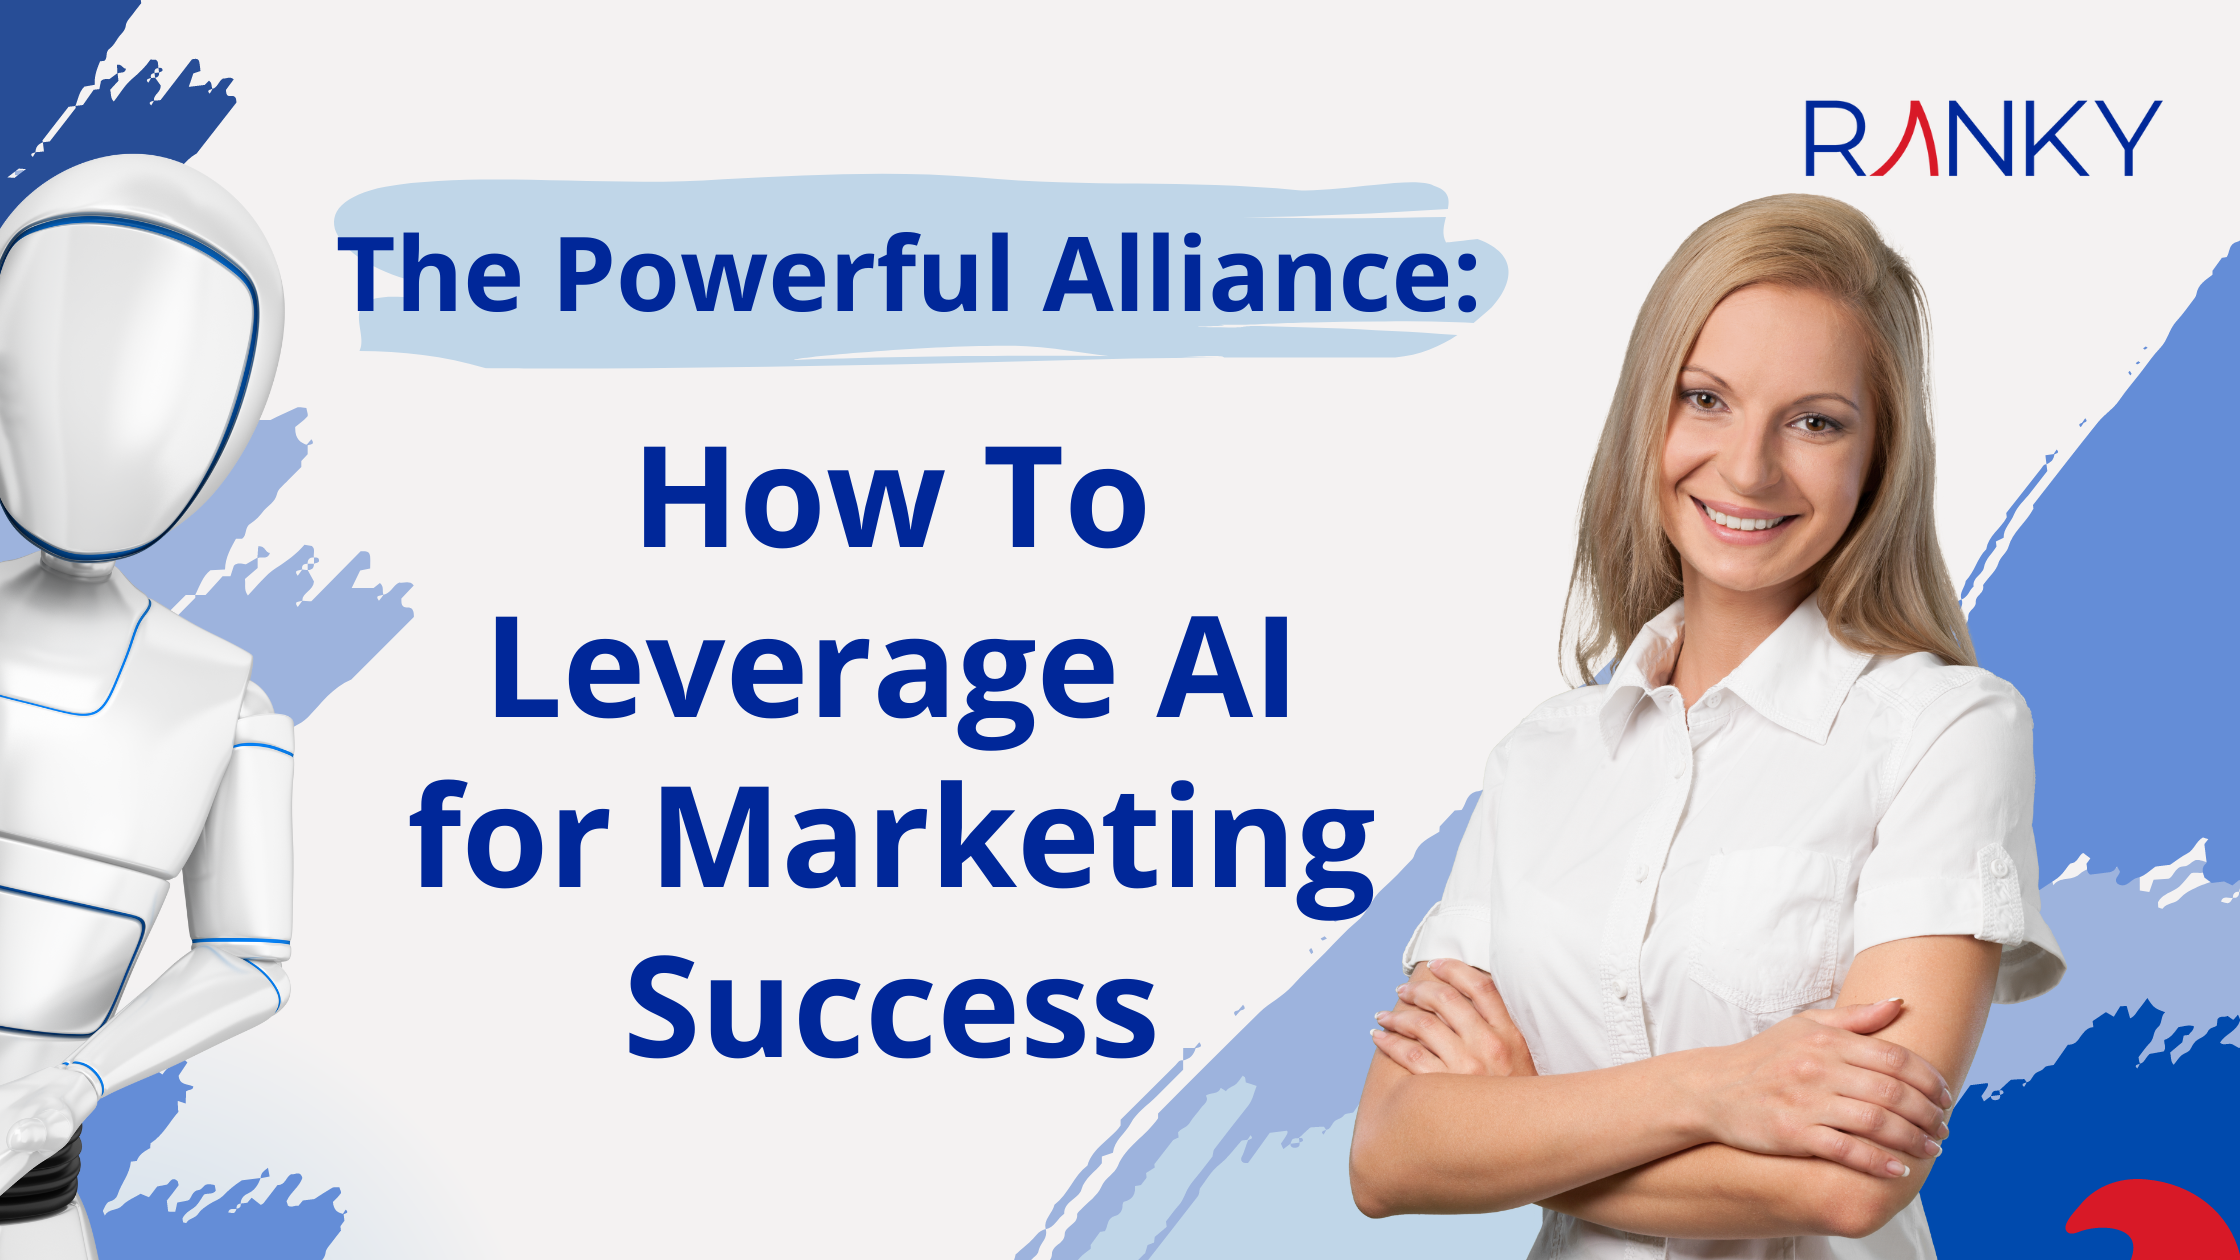 The Powerful Alliance: How to Leverage AI for Marketing Success